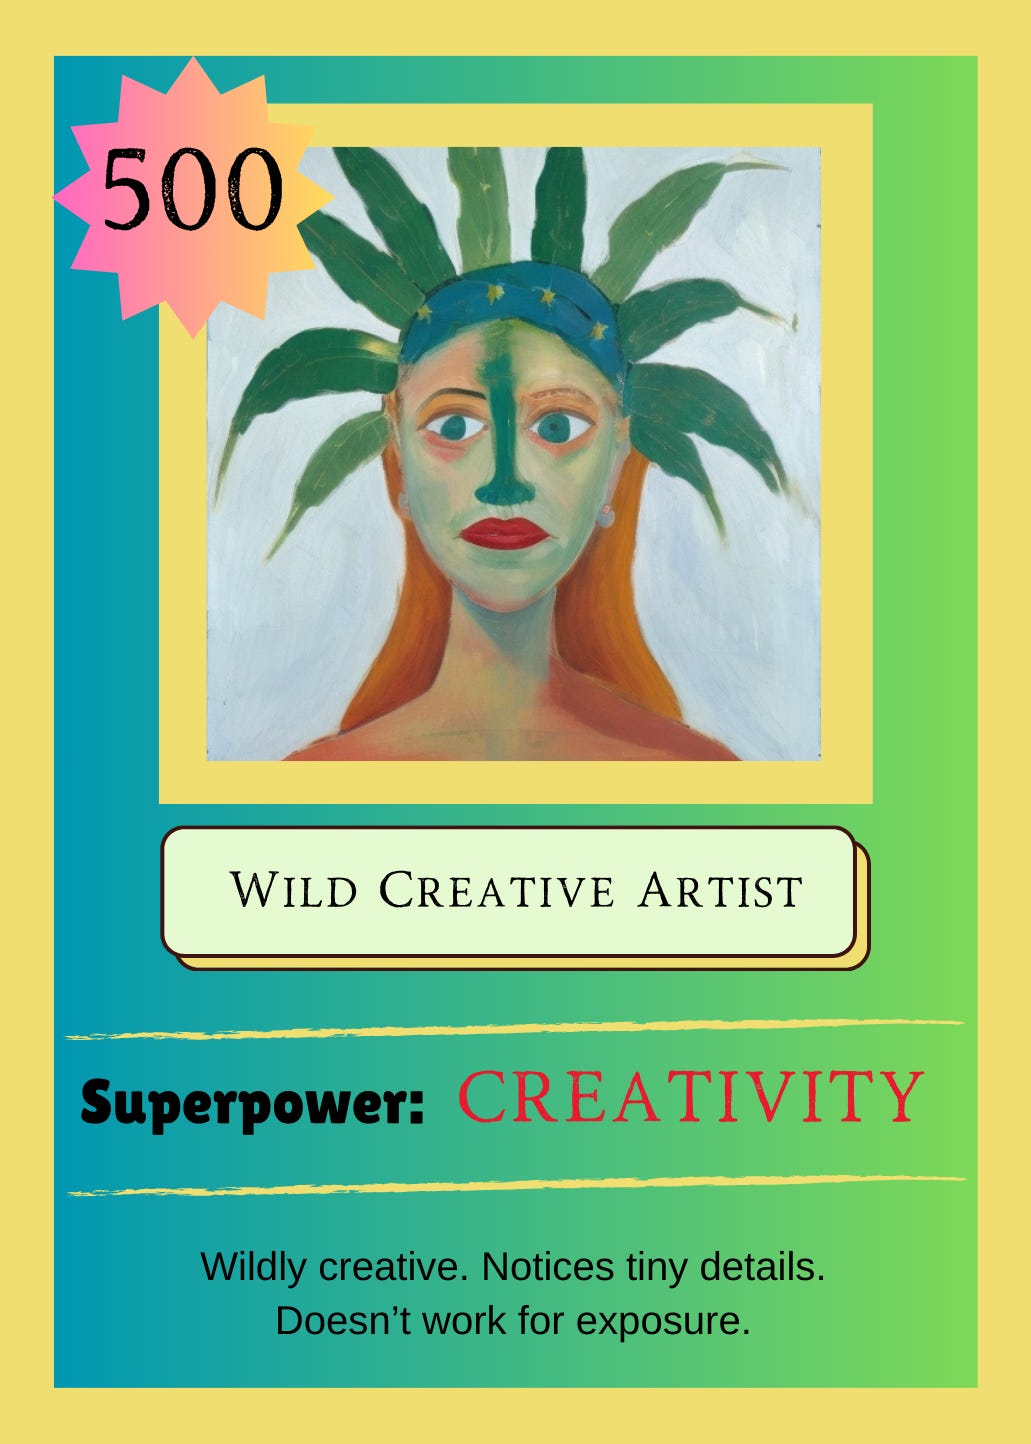 Illustration of a person with a green face and artistic make-up, depicted as "wild creative artist," emphasizing creativity as their superpower, with a blue and yellow background.